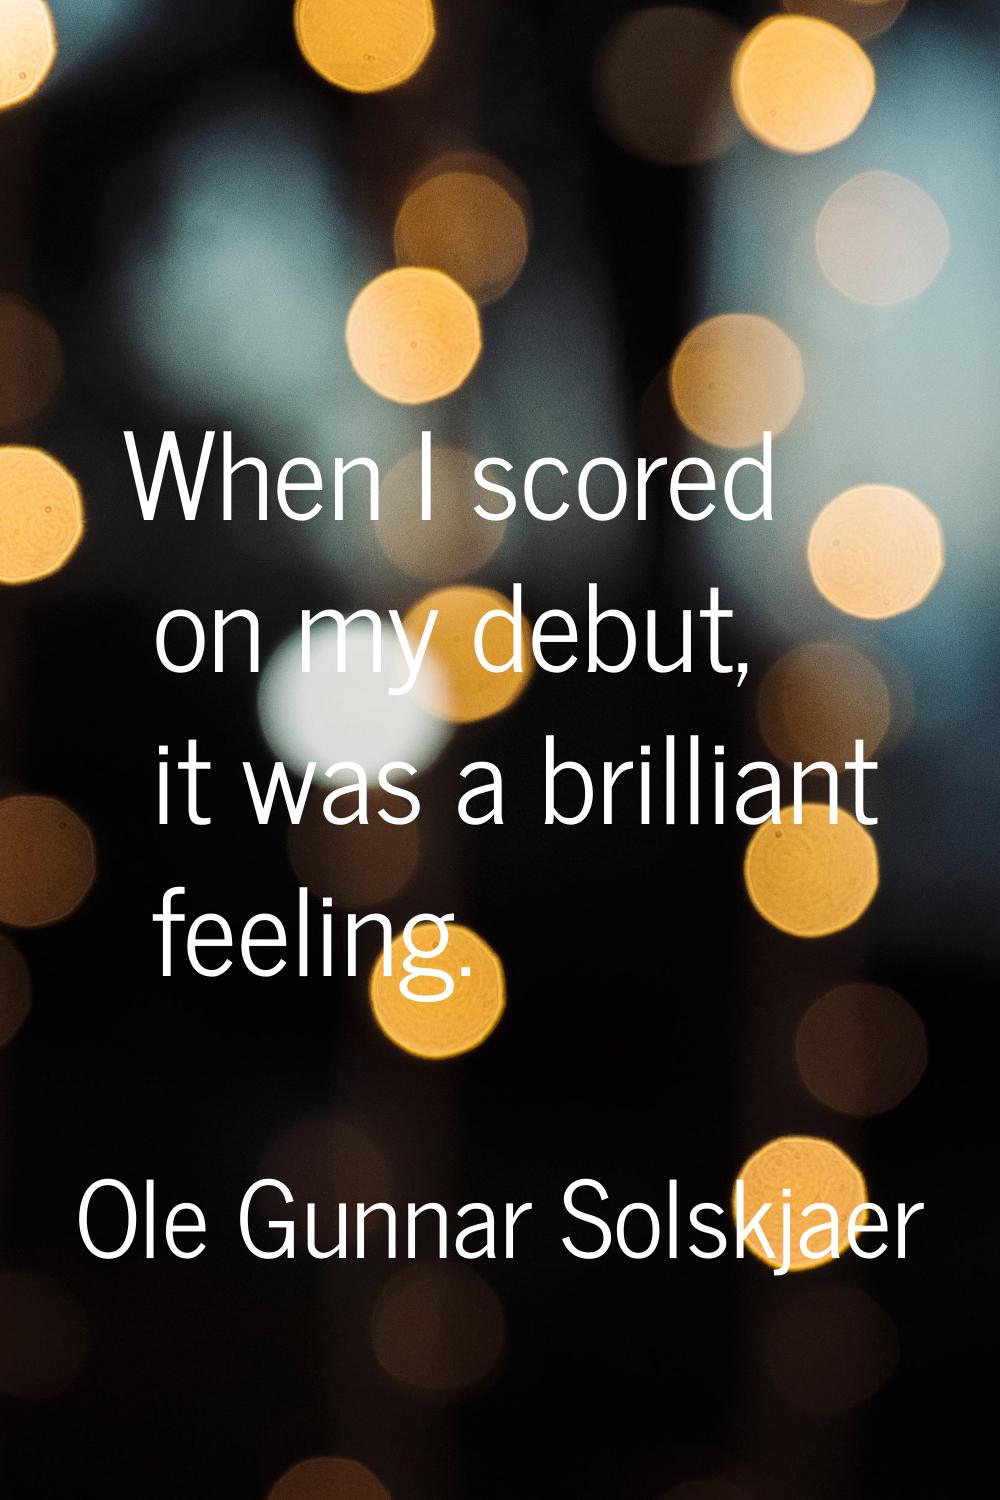 When I scored on my debut, it was a brilliant feeling.